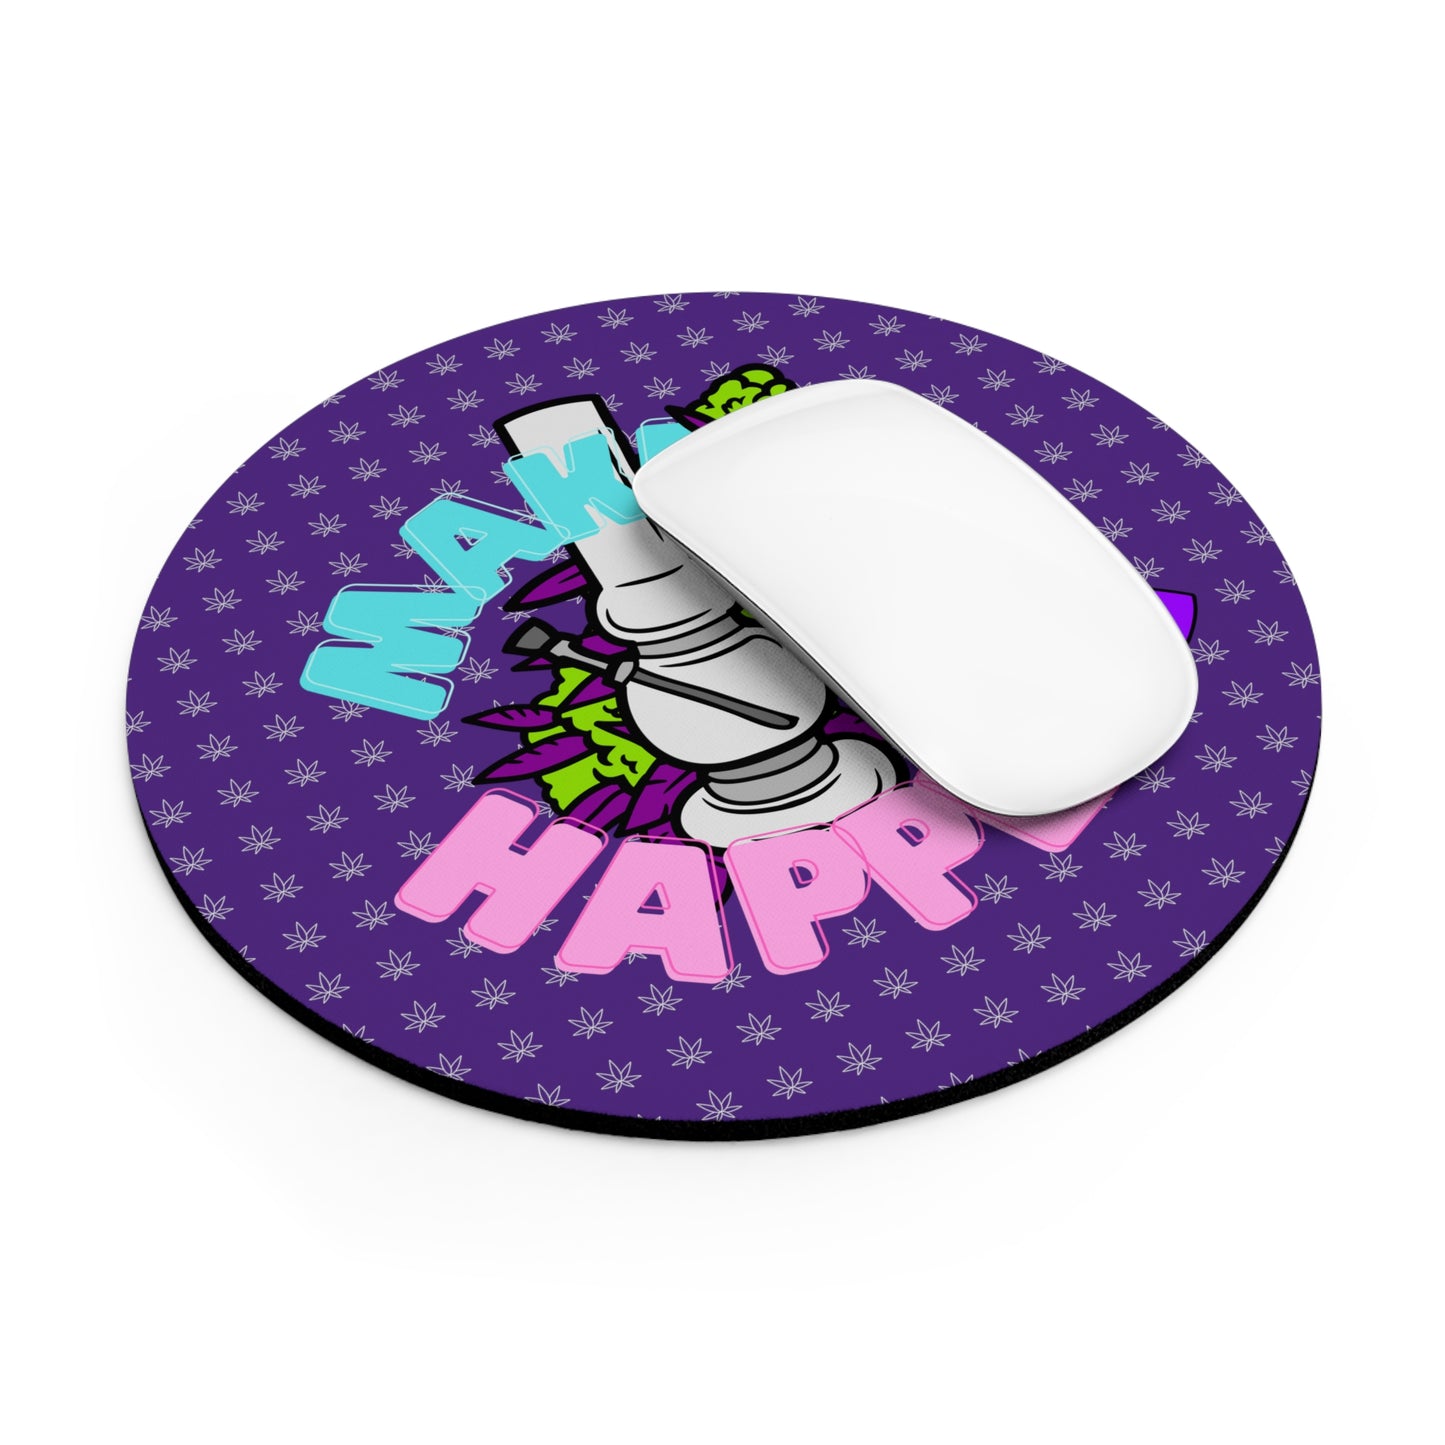 Make it Happen Cannabis, Bong, and Lighter Mouse Pad